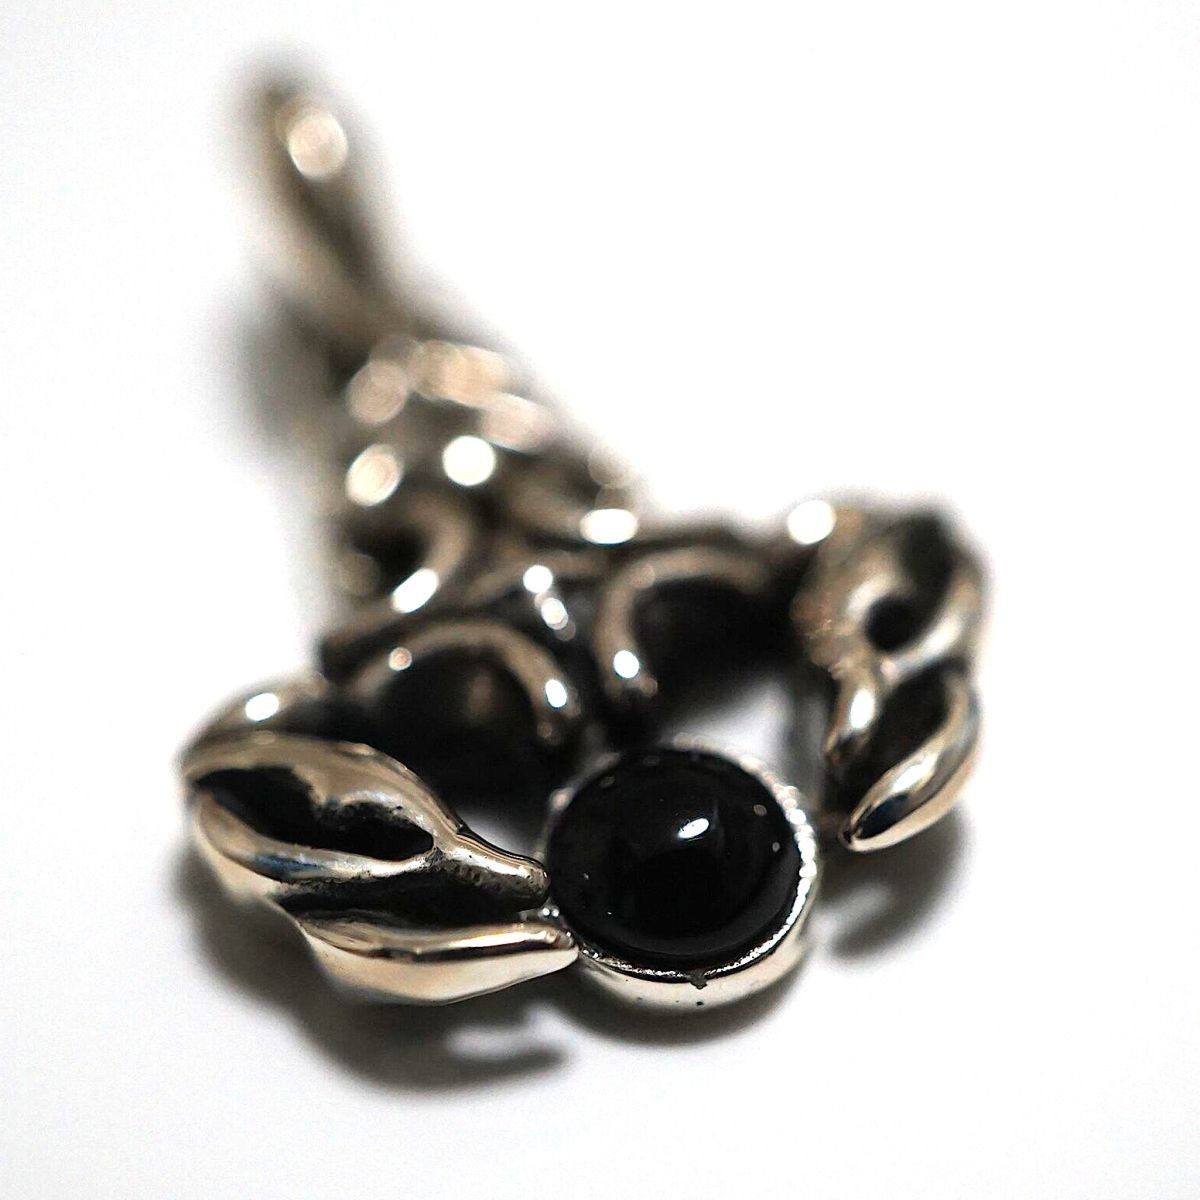  silver 925 necklace pendant silver present Scorpion .sa sleigh onyx free shipping y0602